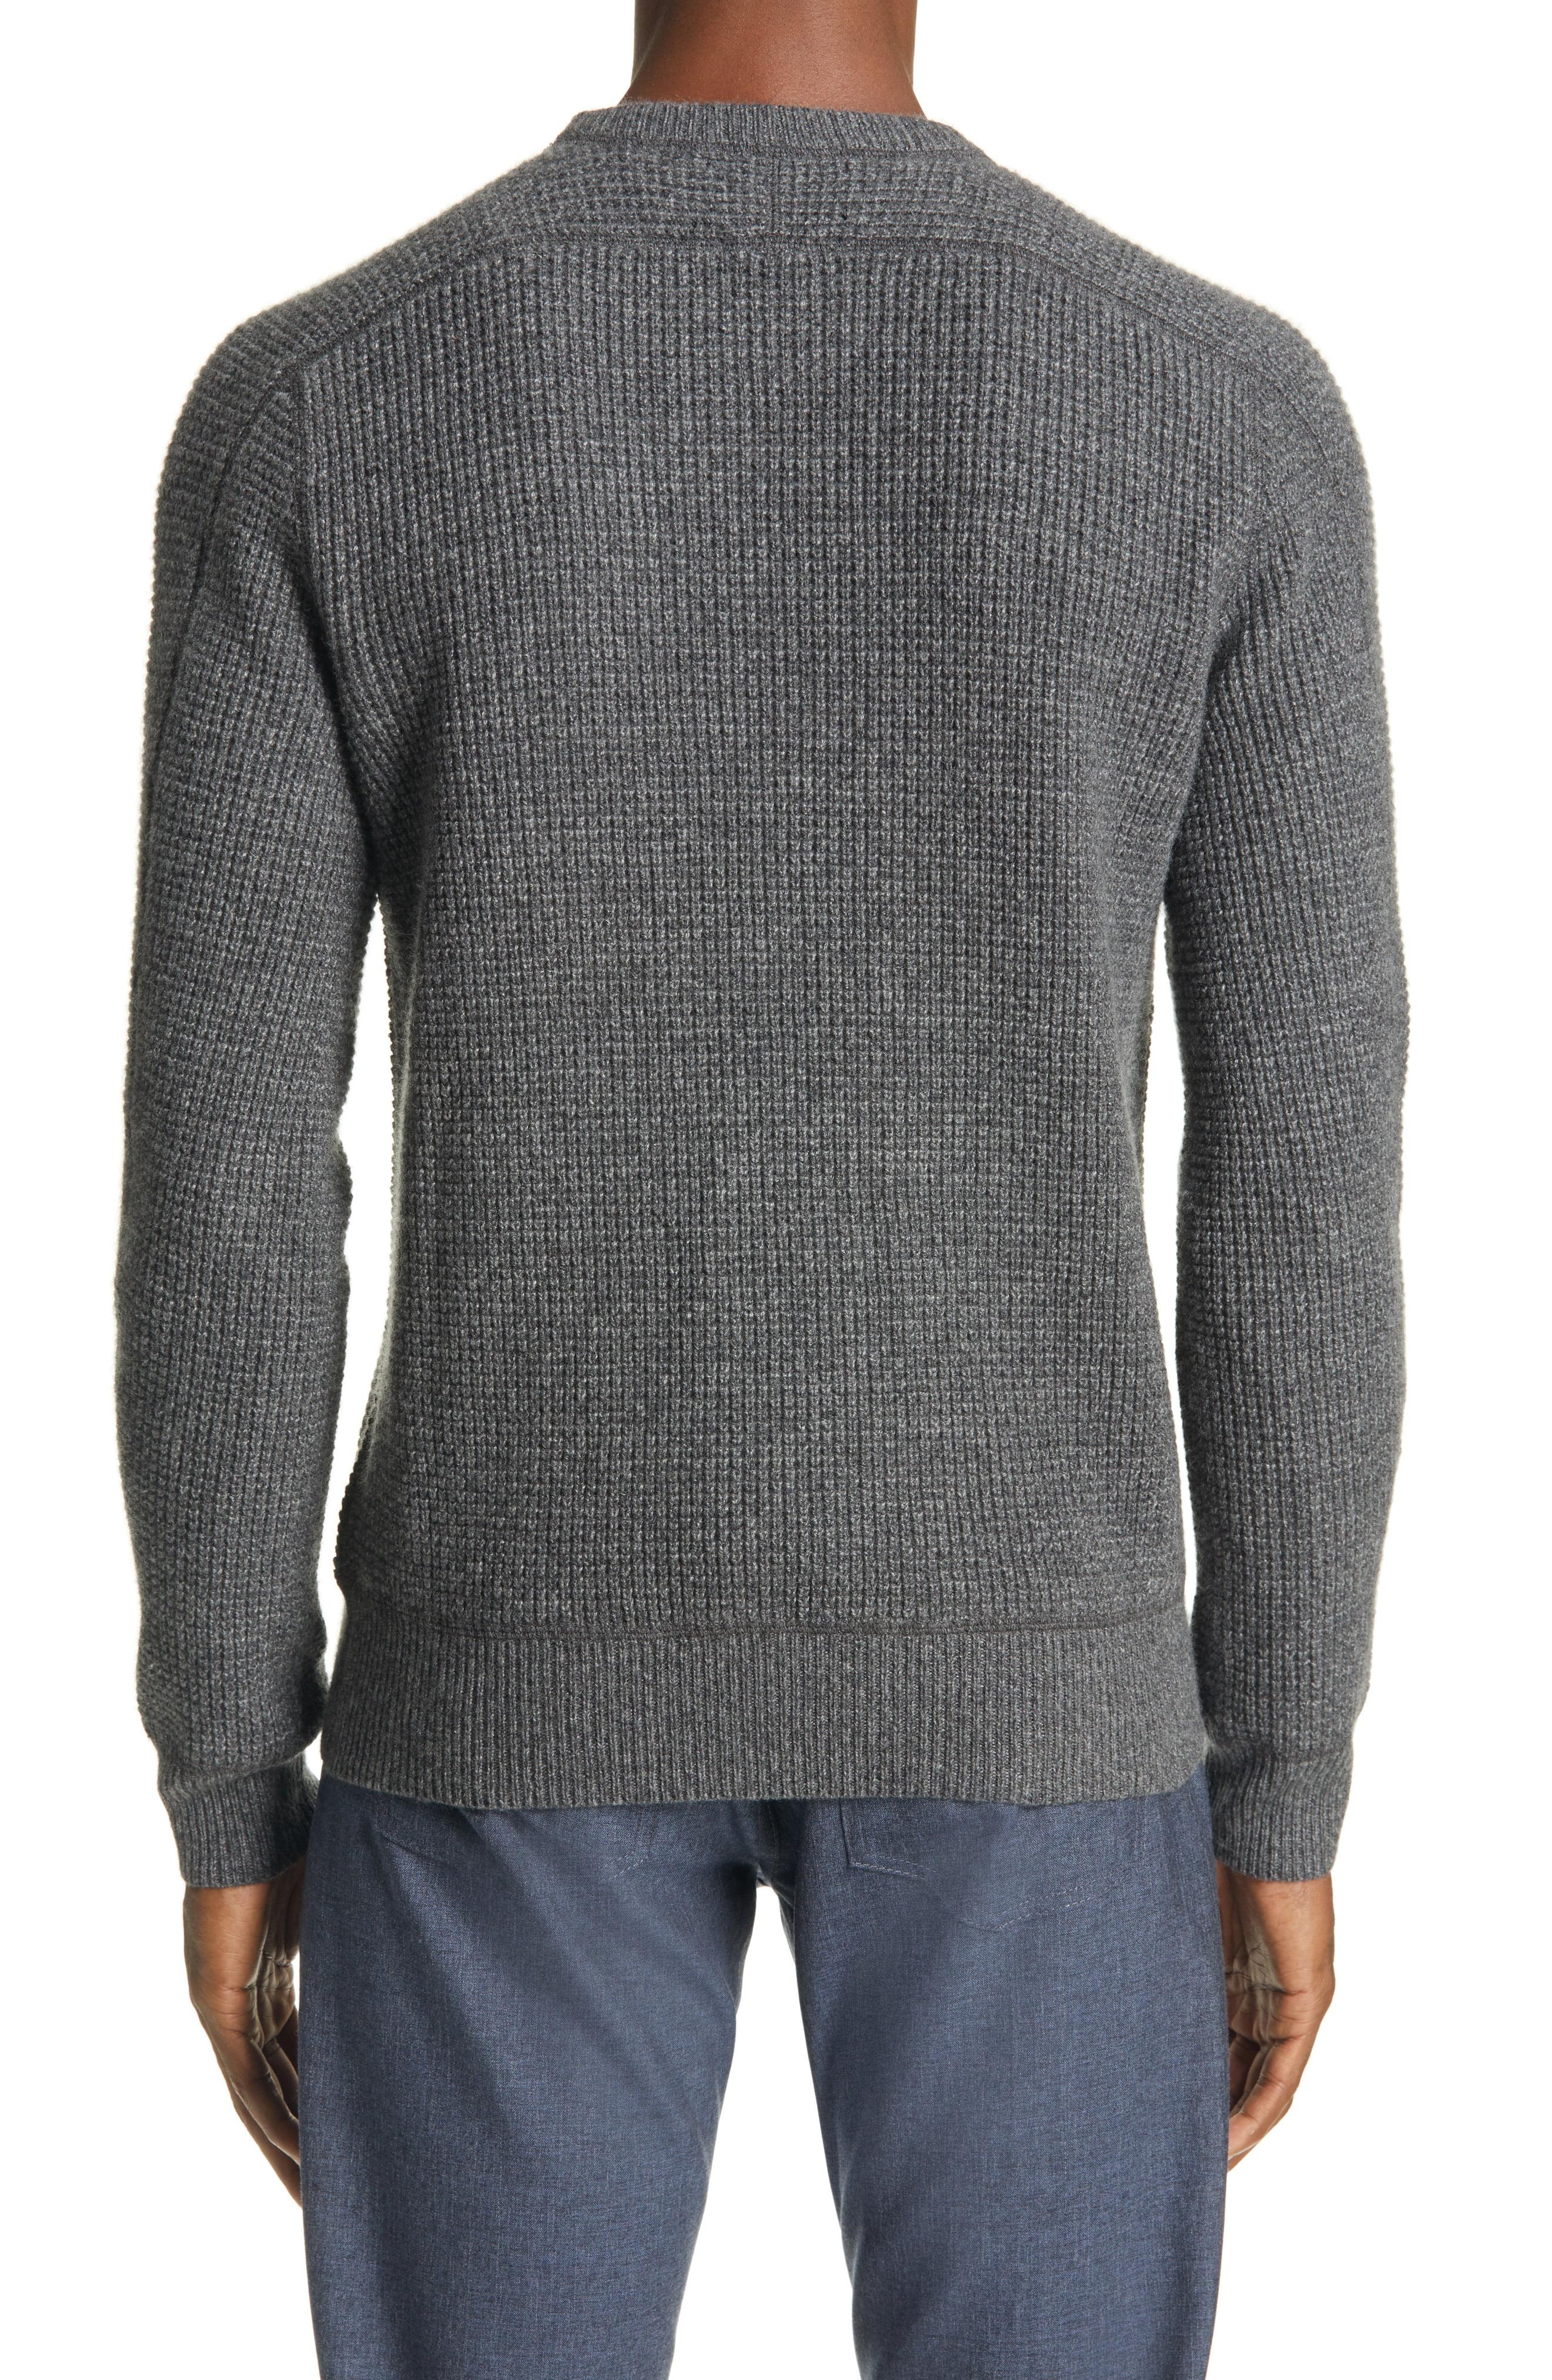 RRL Waffle Knit Men's Cashmere Sweater in Dark Heather Grey (Gray) for ...